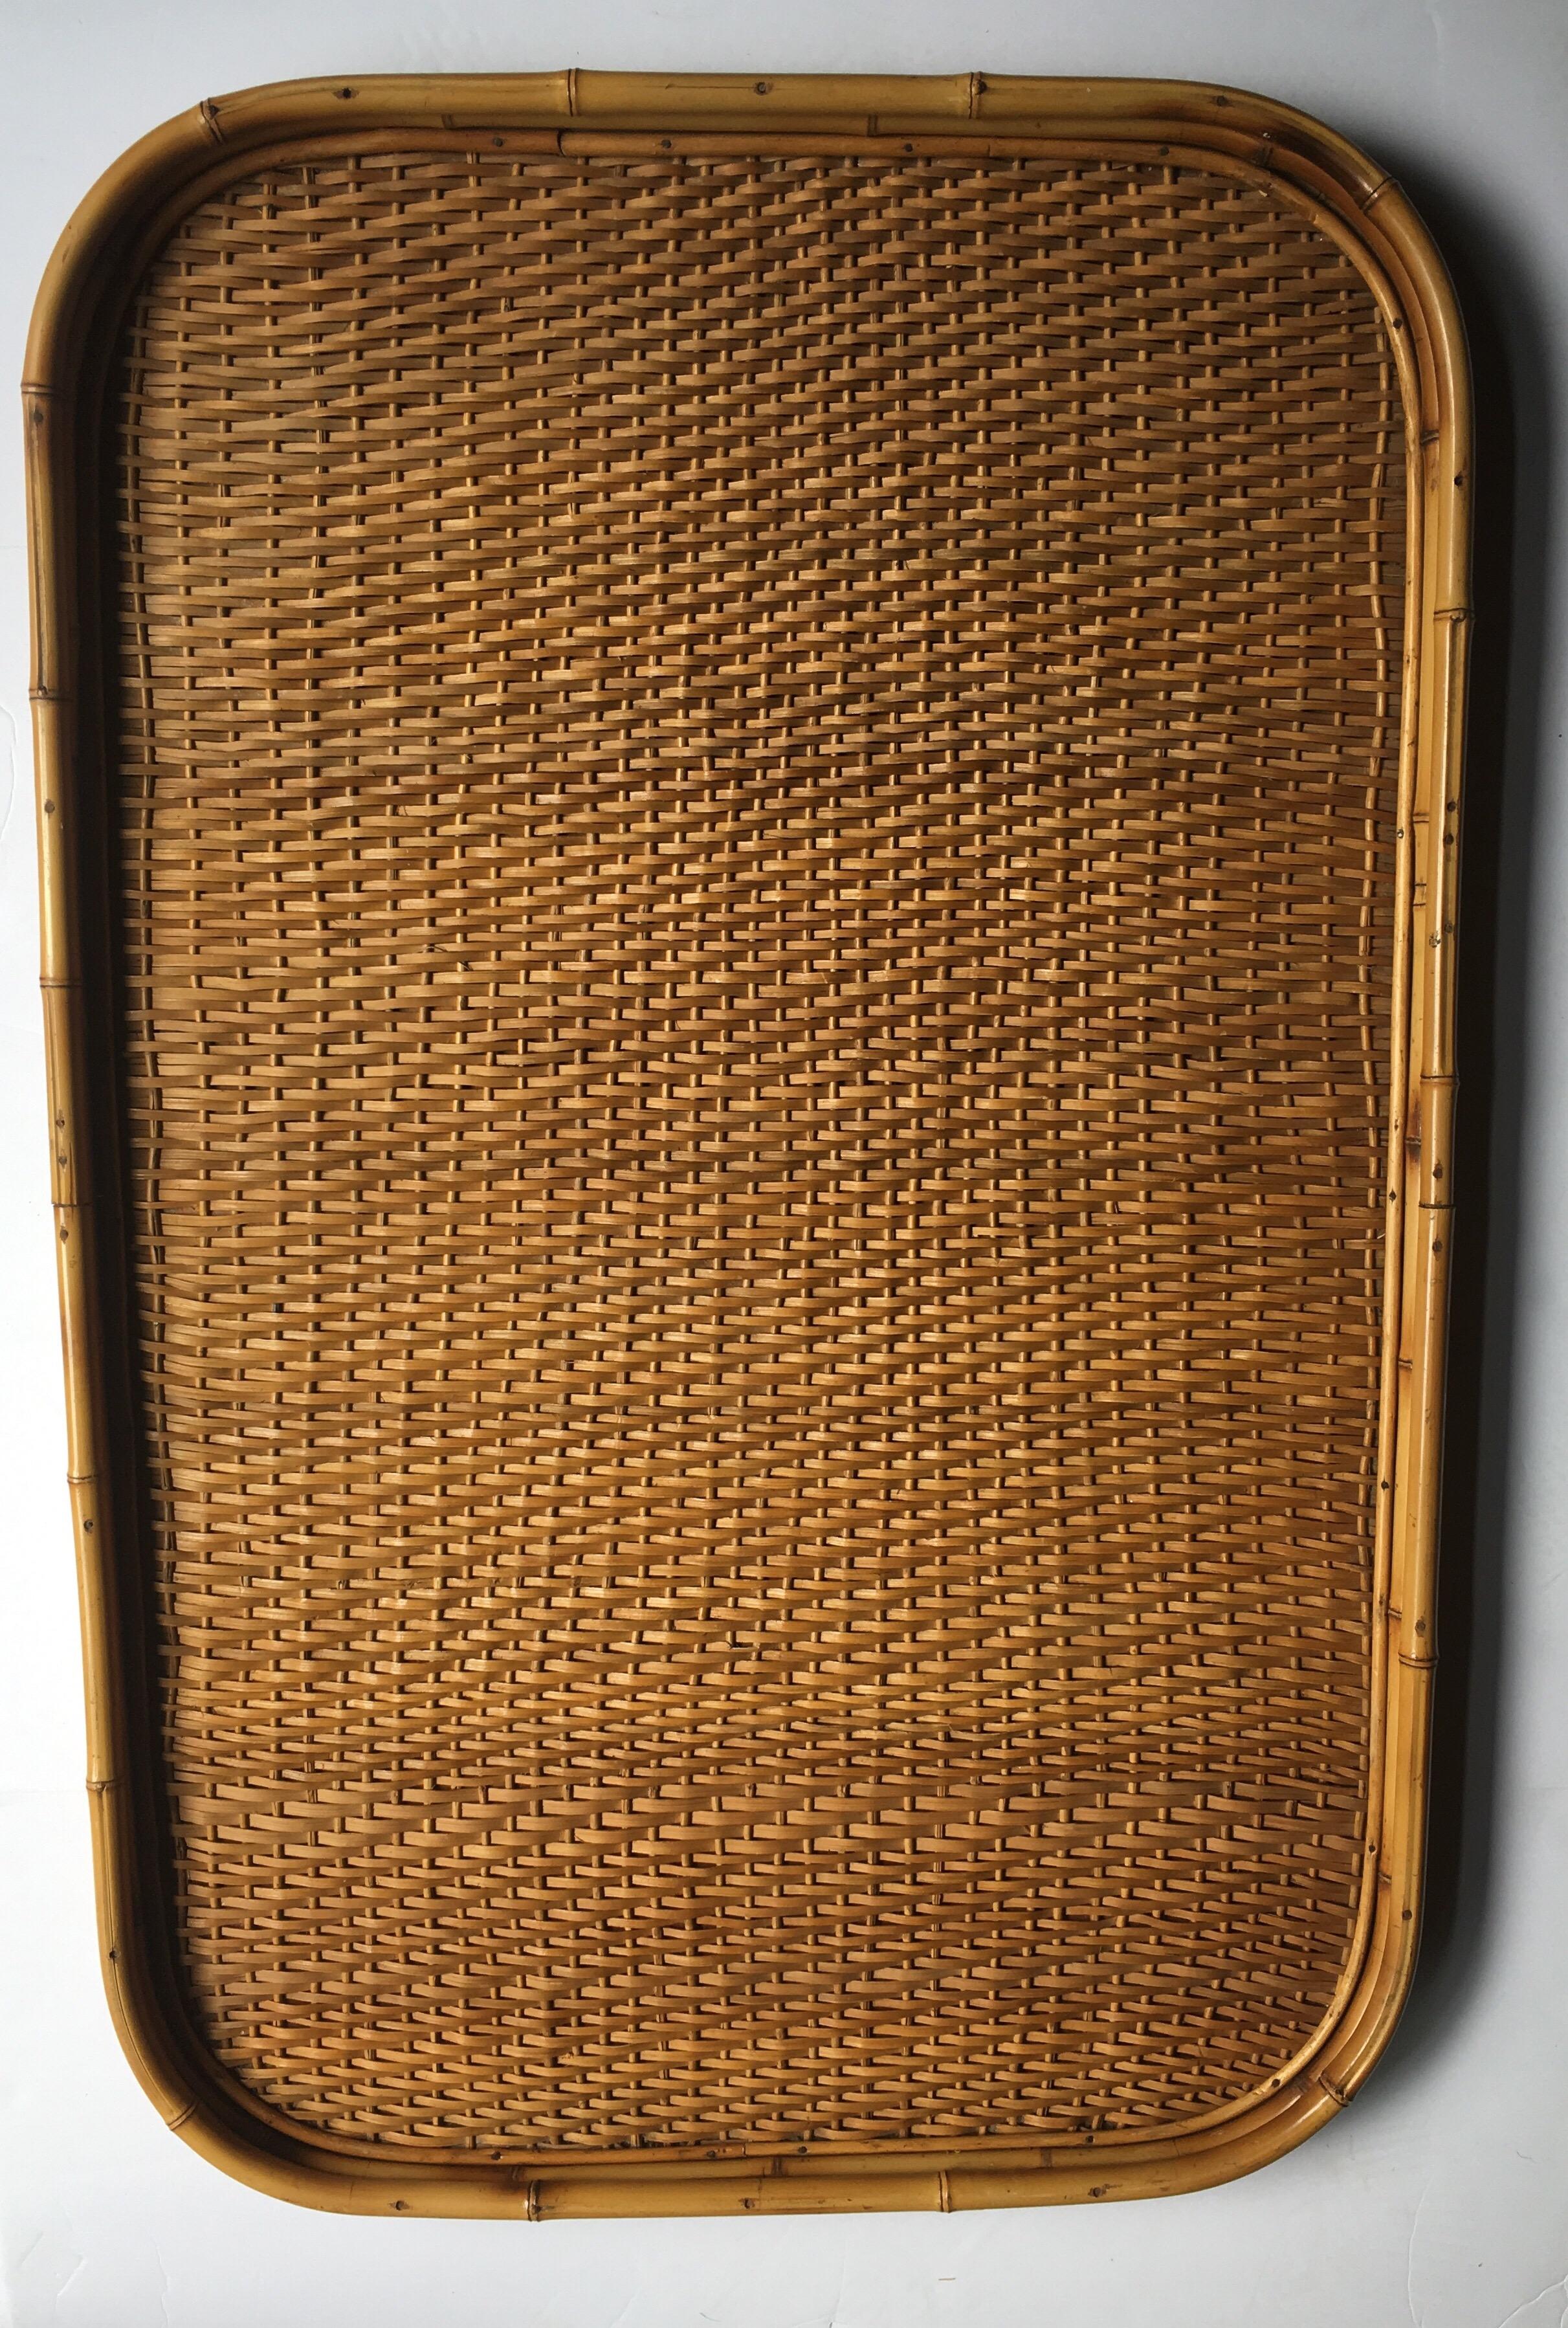 Impressive oversized rectangular woven rattan wicker bamboo tray with removable clear glass insert. This beautiful handcrafted serving tray can be displayed on an ottoman or dining sideboard as a bar service station.